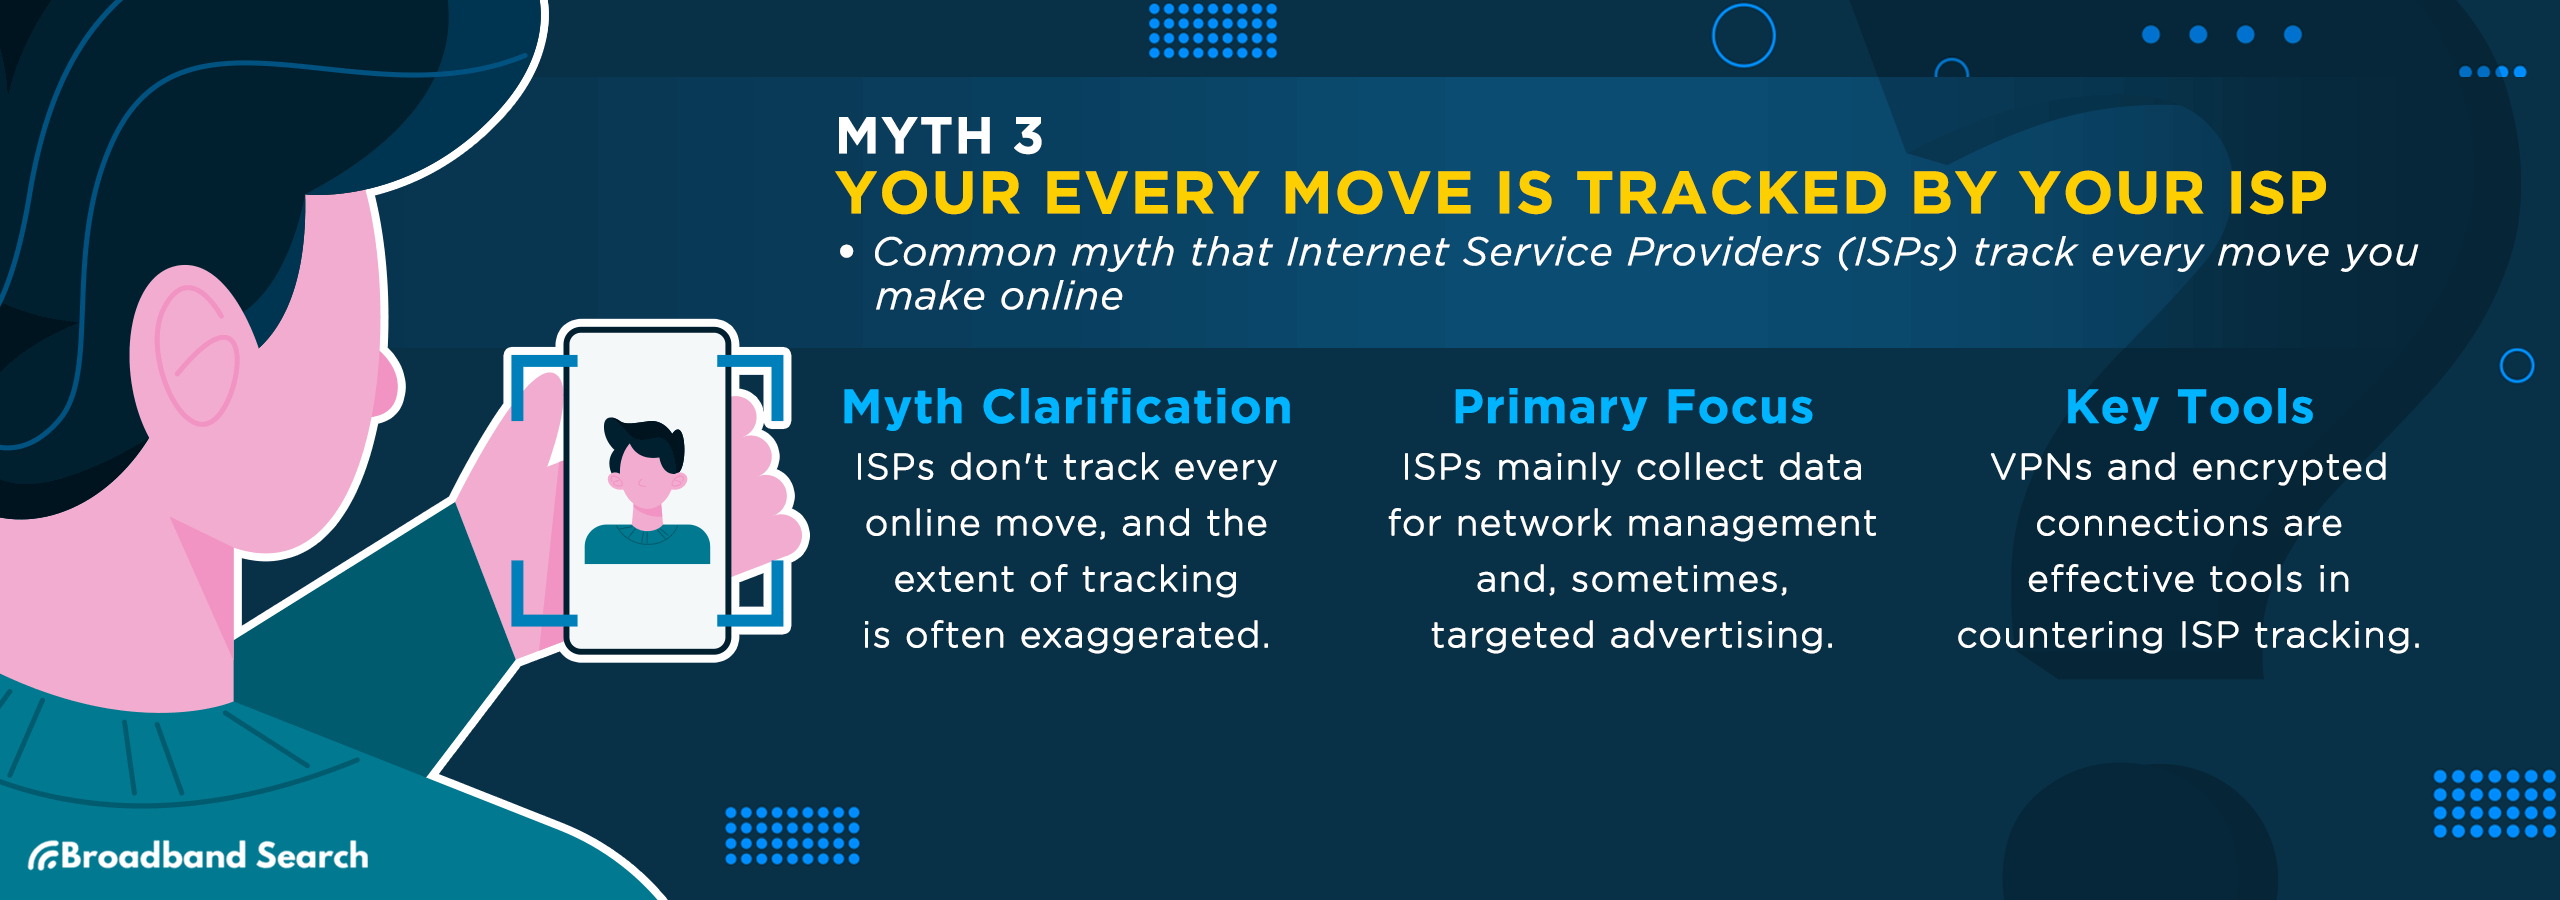 third internet myth, your every move is tracked by your ISP